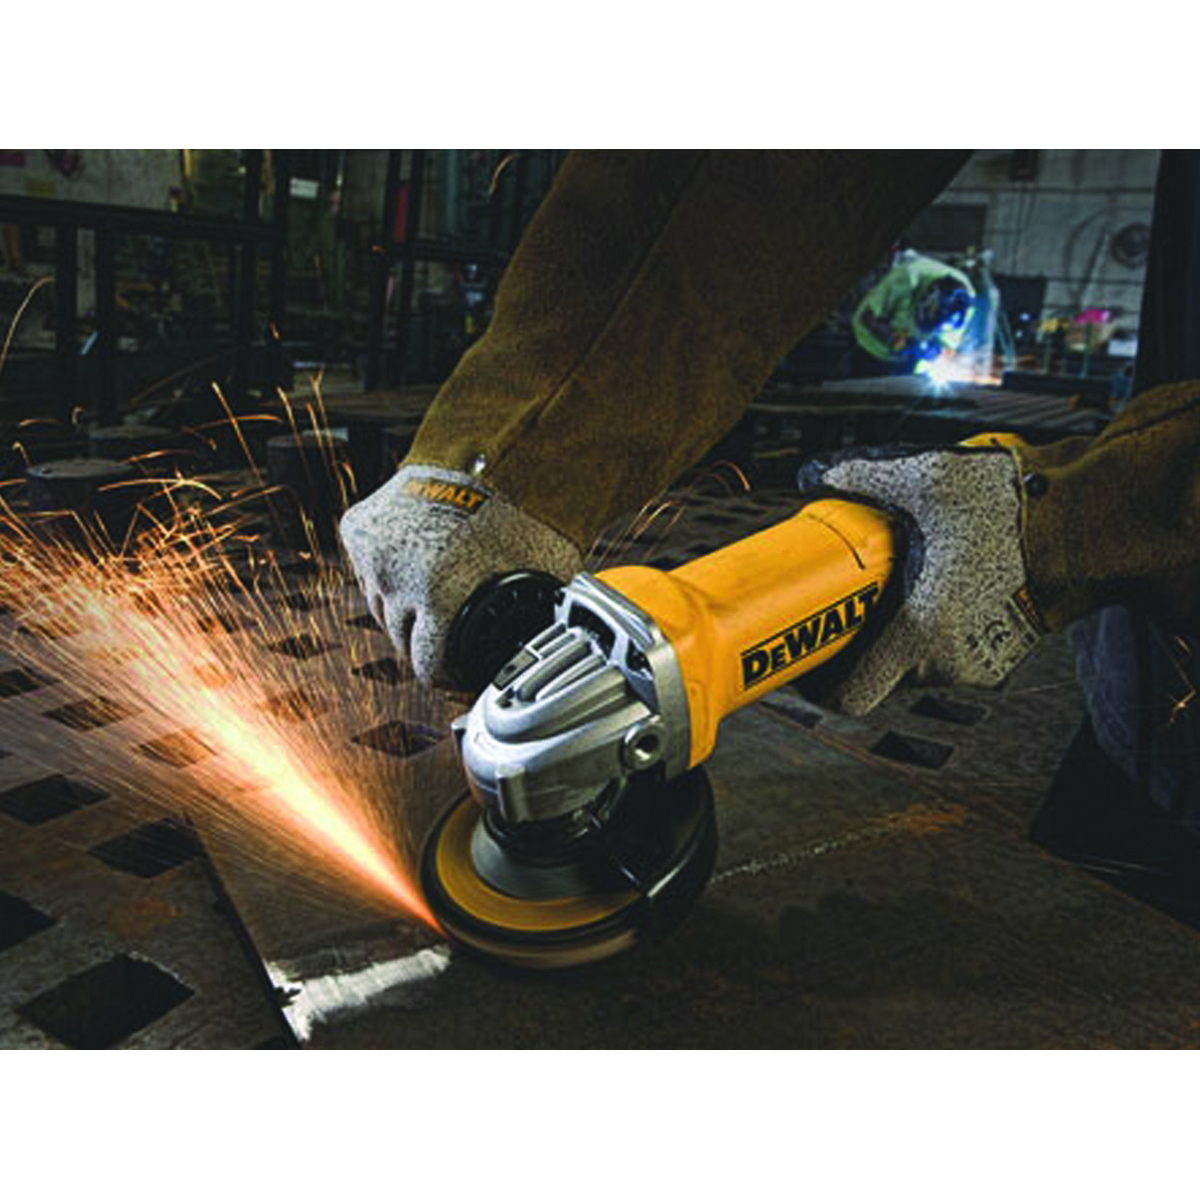 DeWALT DWE402 Small Angle Grinder, 11 A, 5/8-11 Spindle, 4-1/2 in Dia Wheel, 11,000 rpm Speed - 4